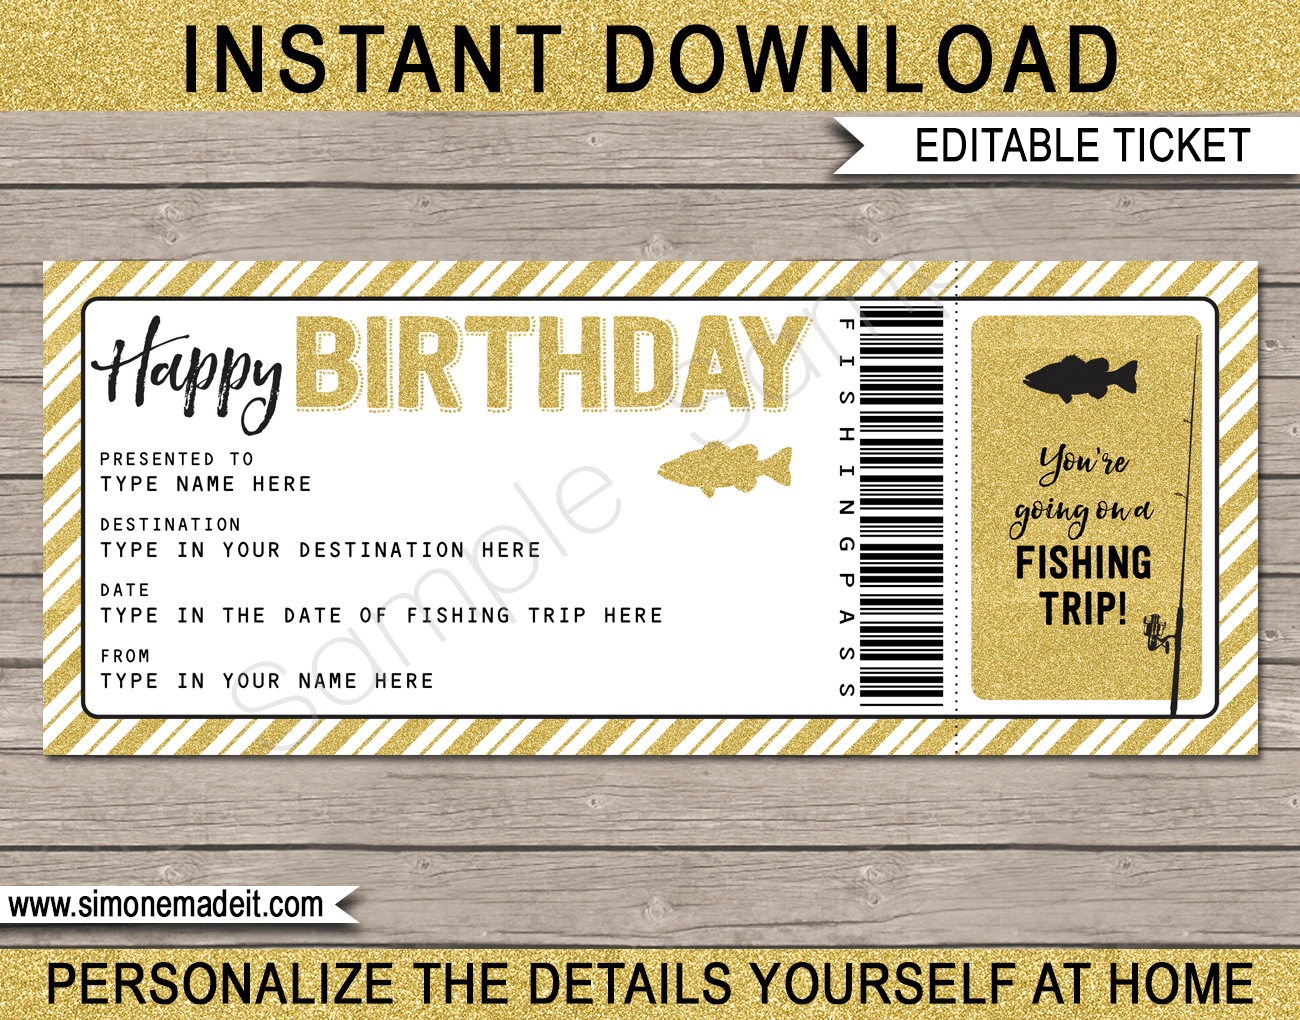 Birthday Fishing Trip Tickets Intended For Custom Gift Certificate Template